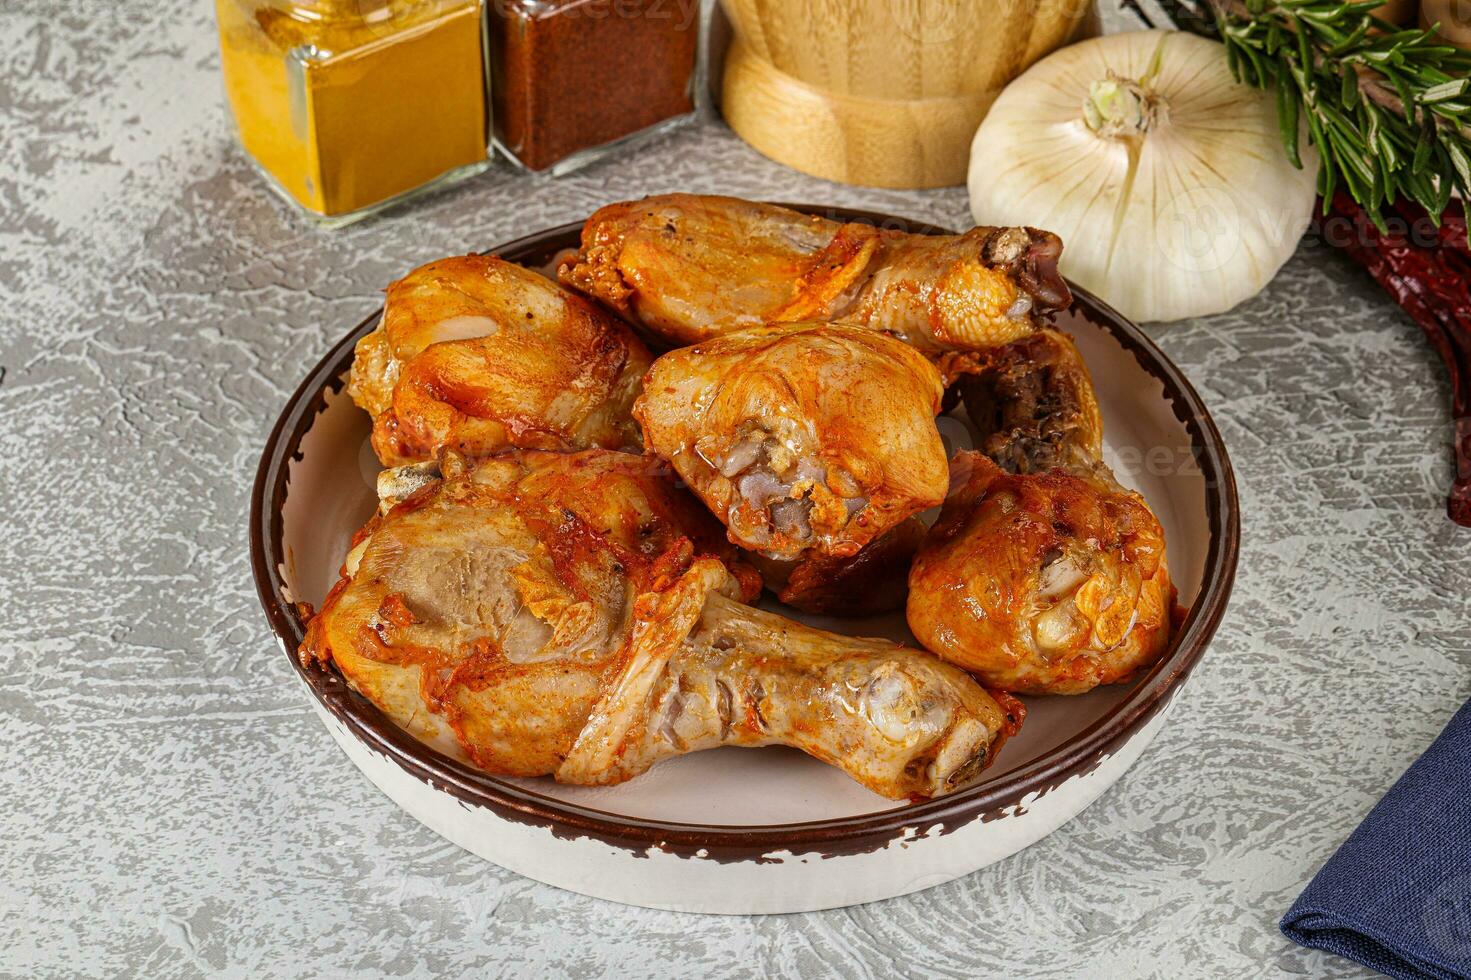 Raw marinated chicken drumstick for cooking photo